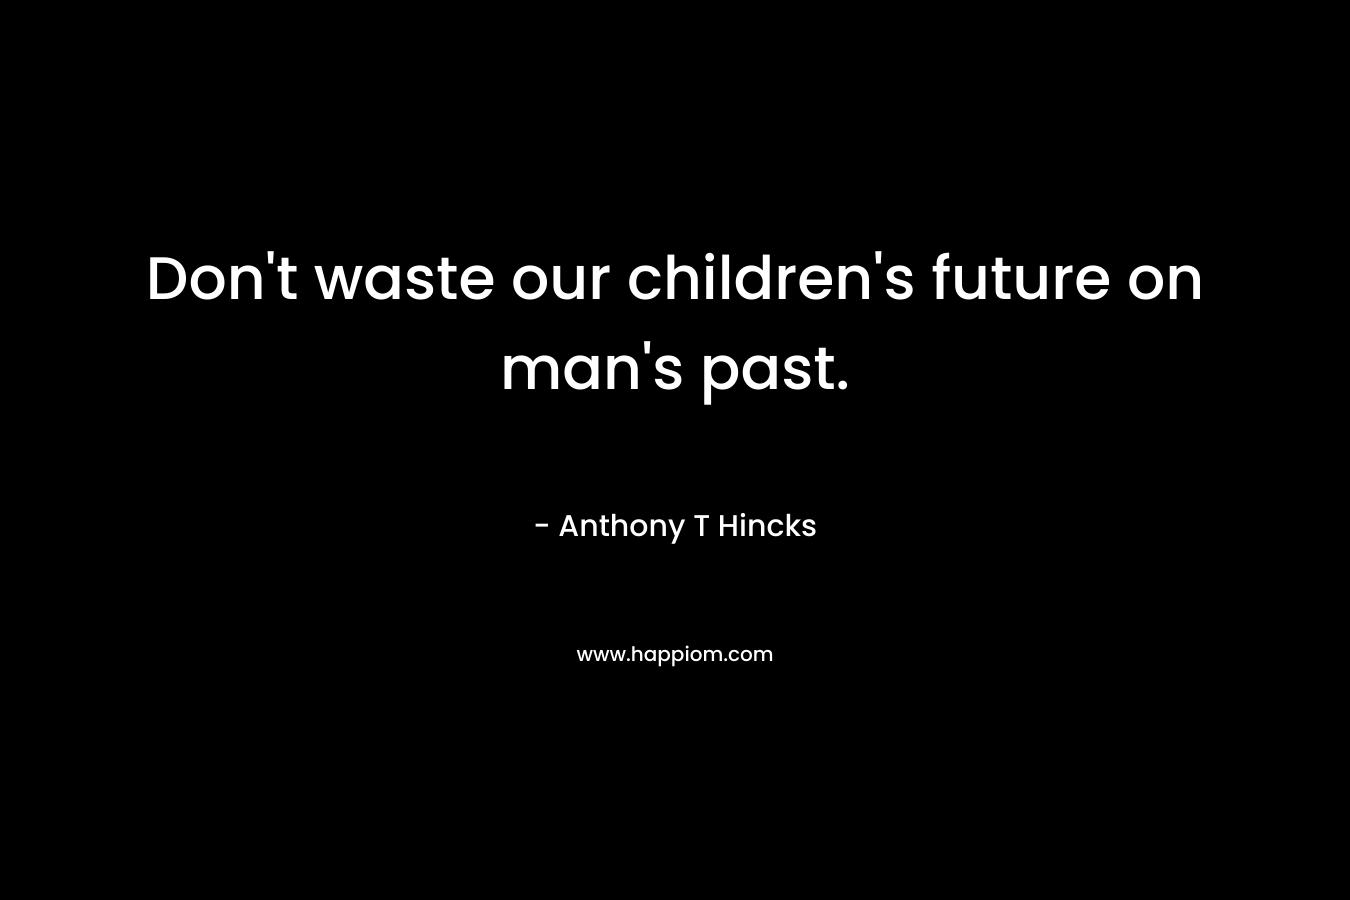 Don't waste our children's future on man's past.